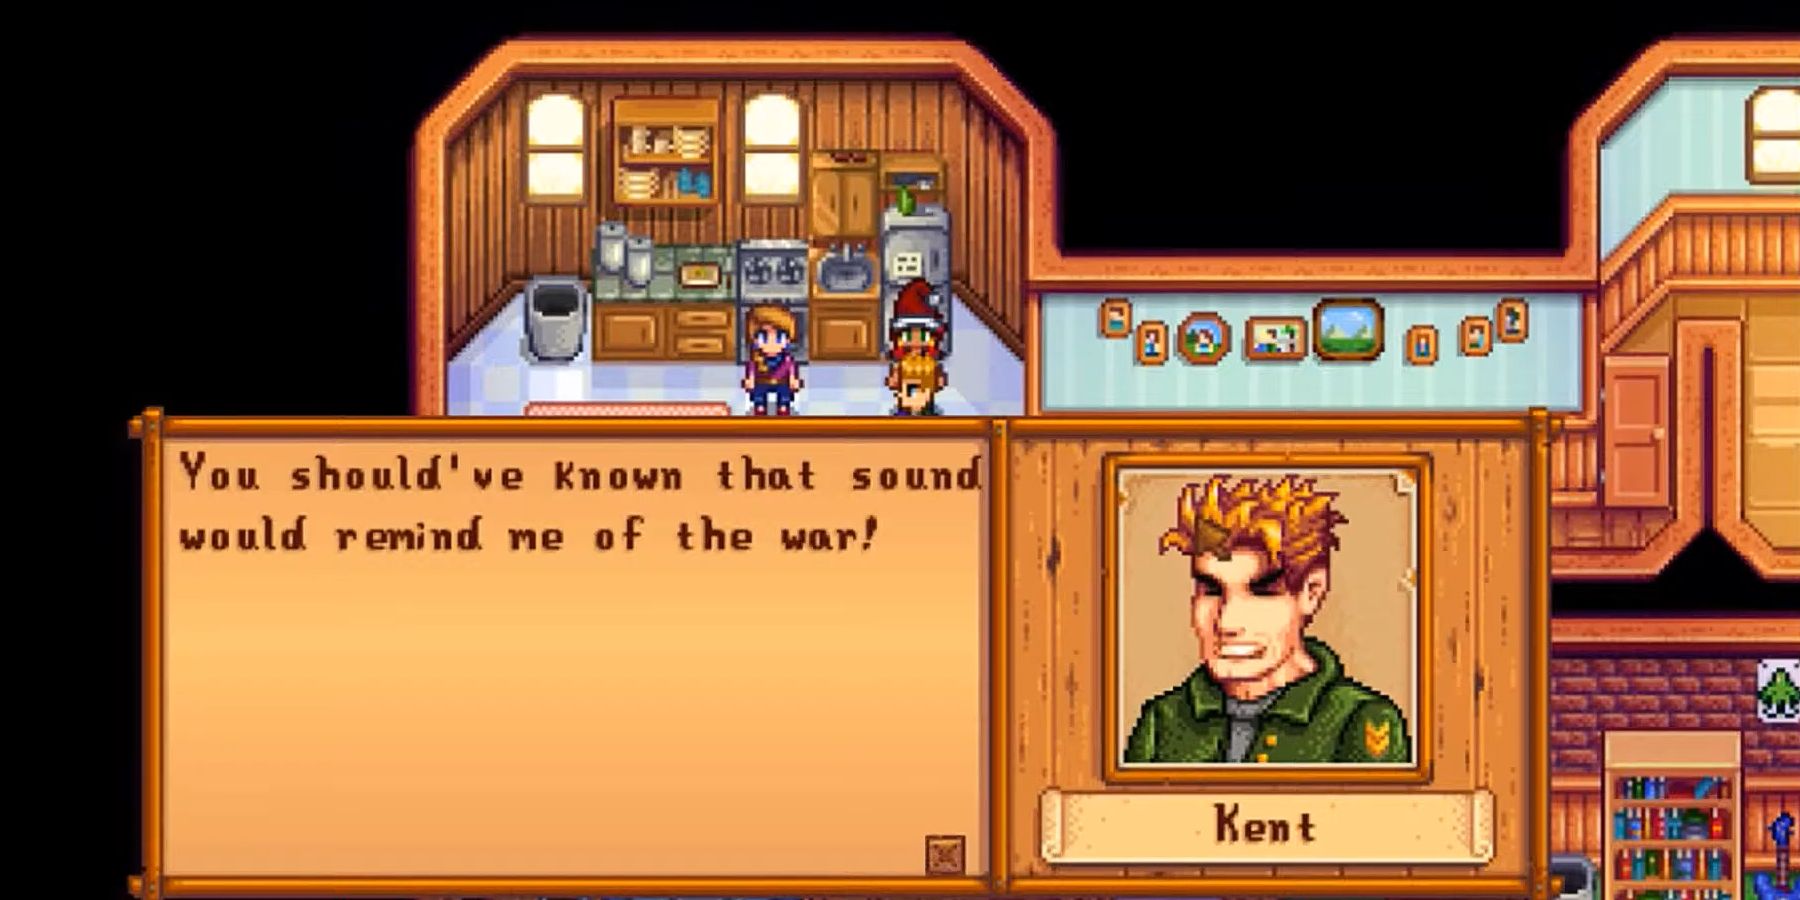 Kent yells at the player over the popcorn noise, which reminds him of the war in Stardew Valley